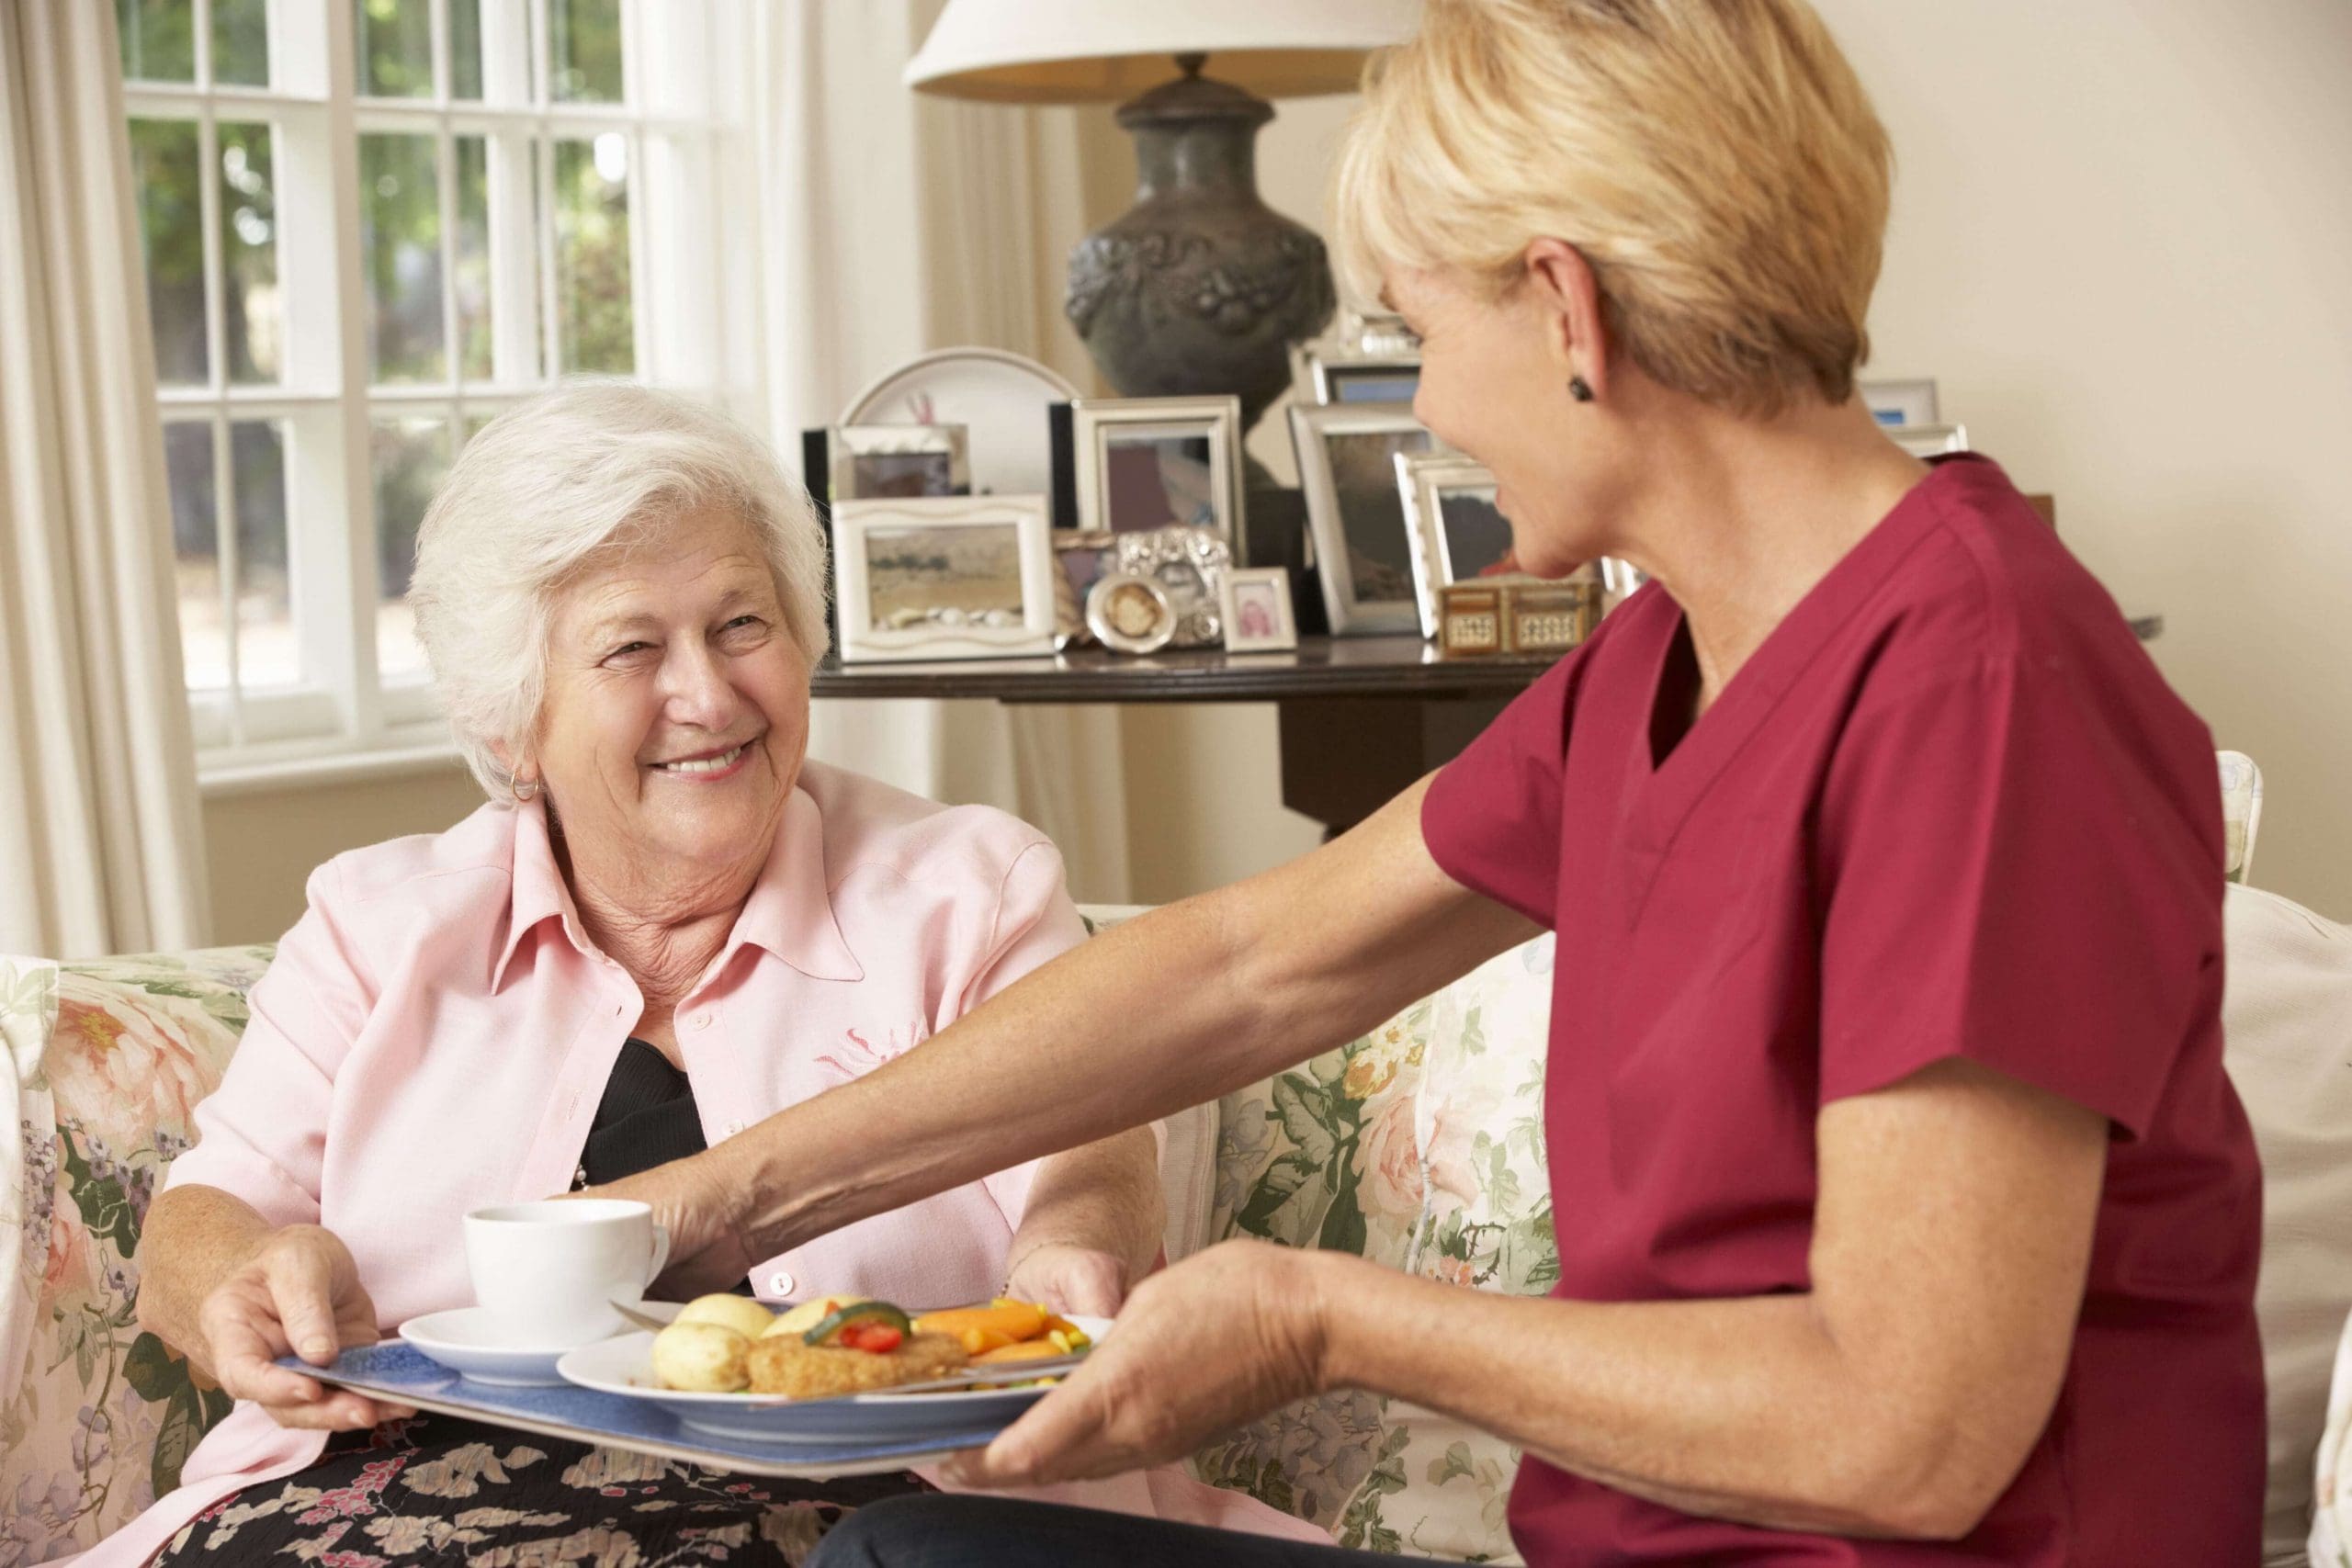 Home care worker helping senior woman with meal preparation